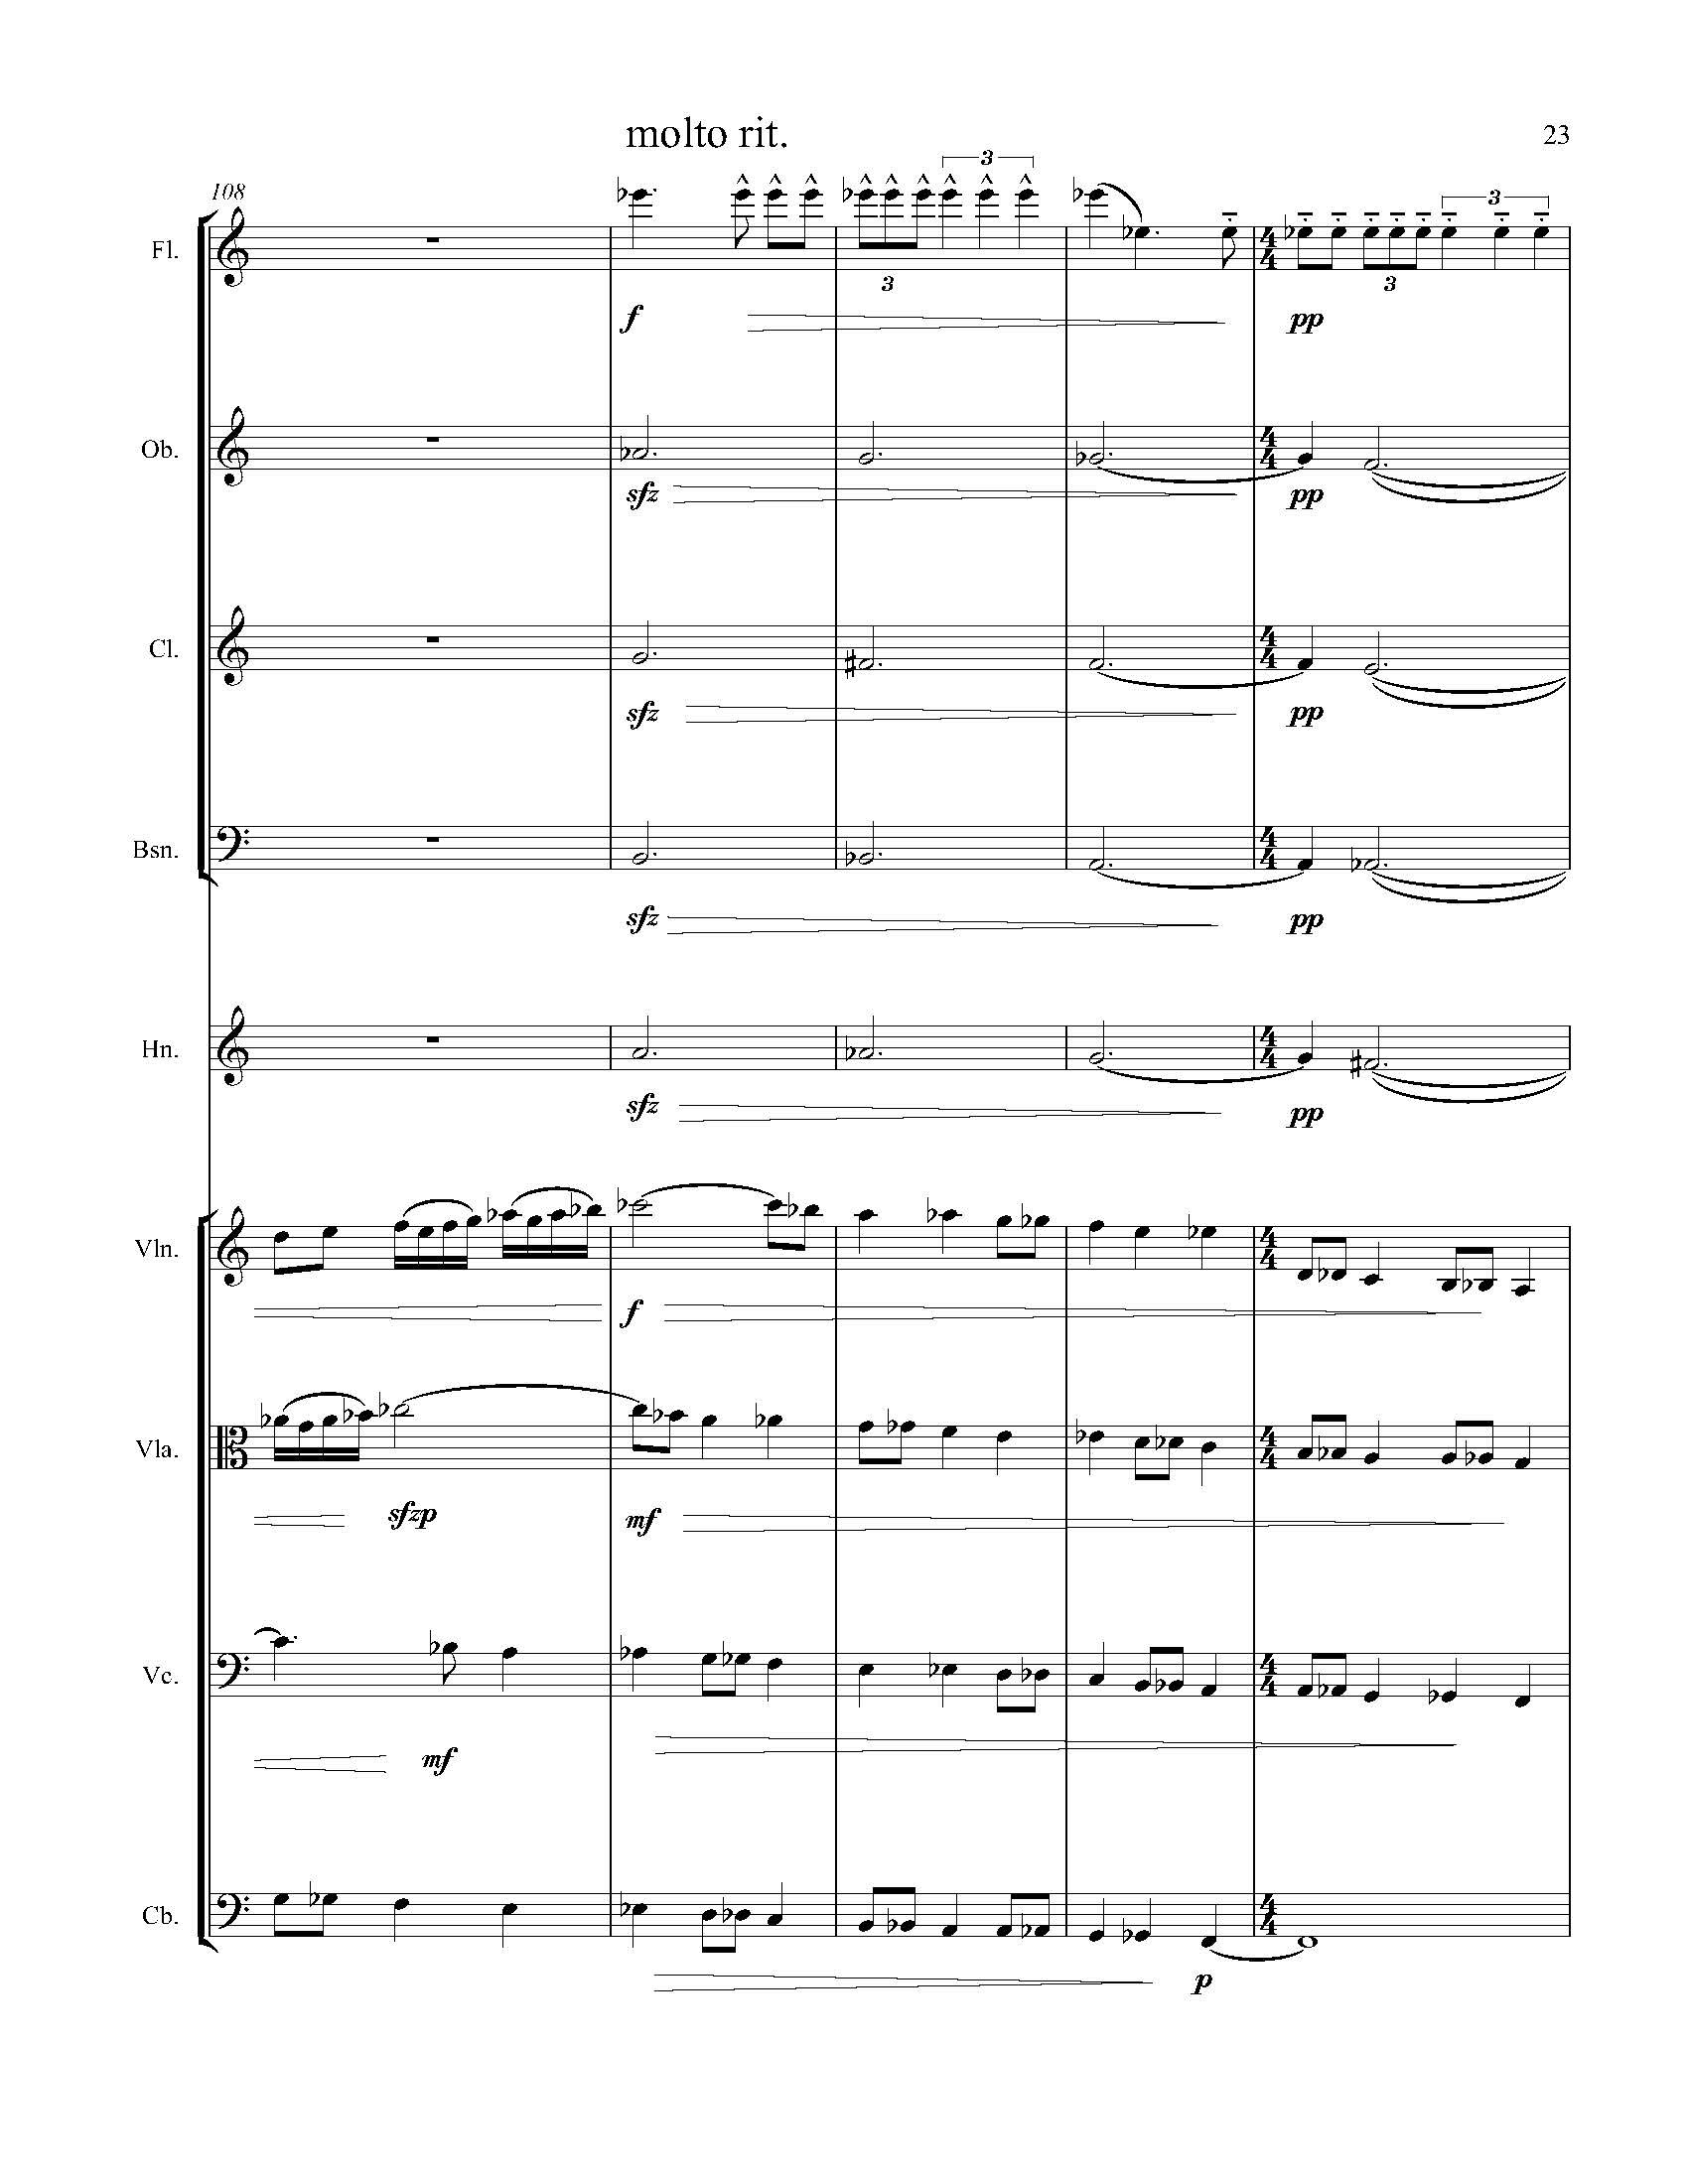 In Search of a Bird - Complete Score_Page_29.jpg